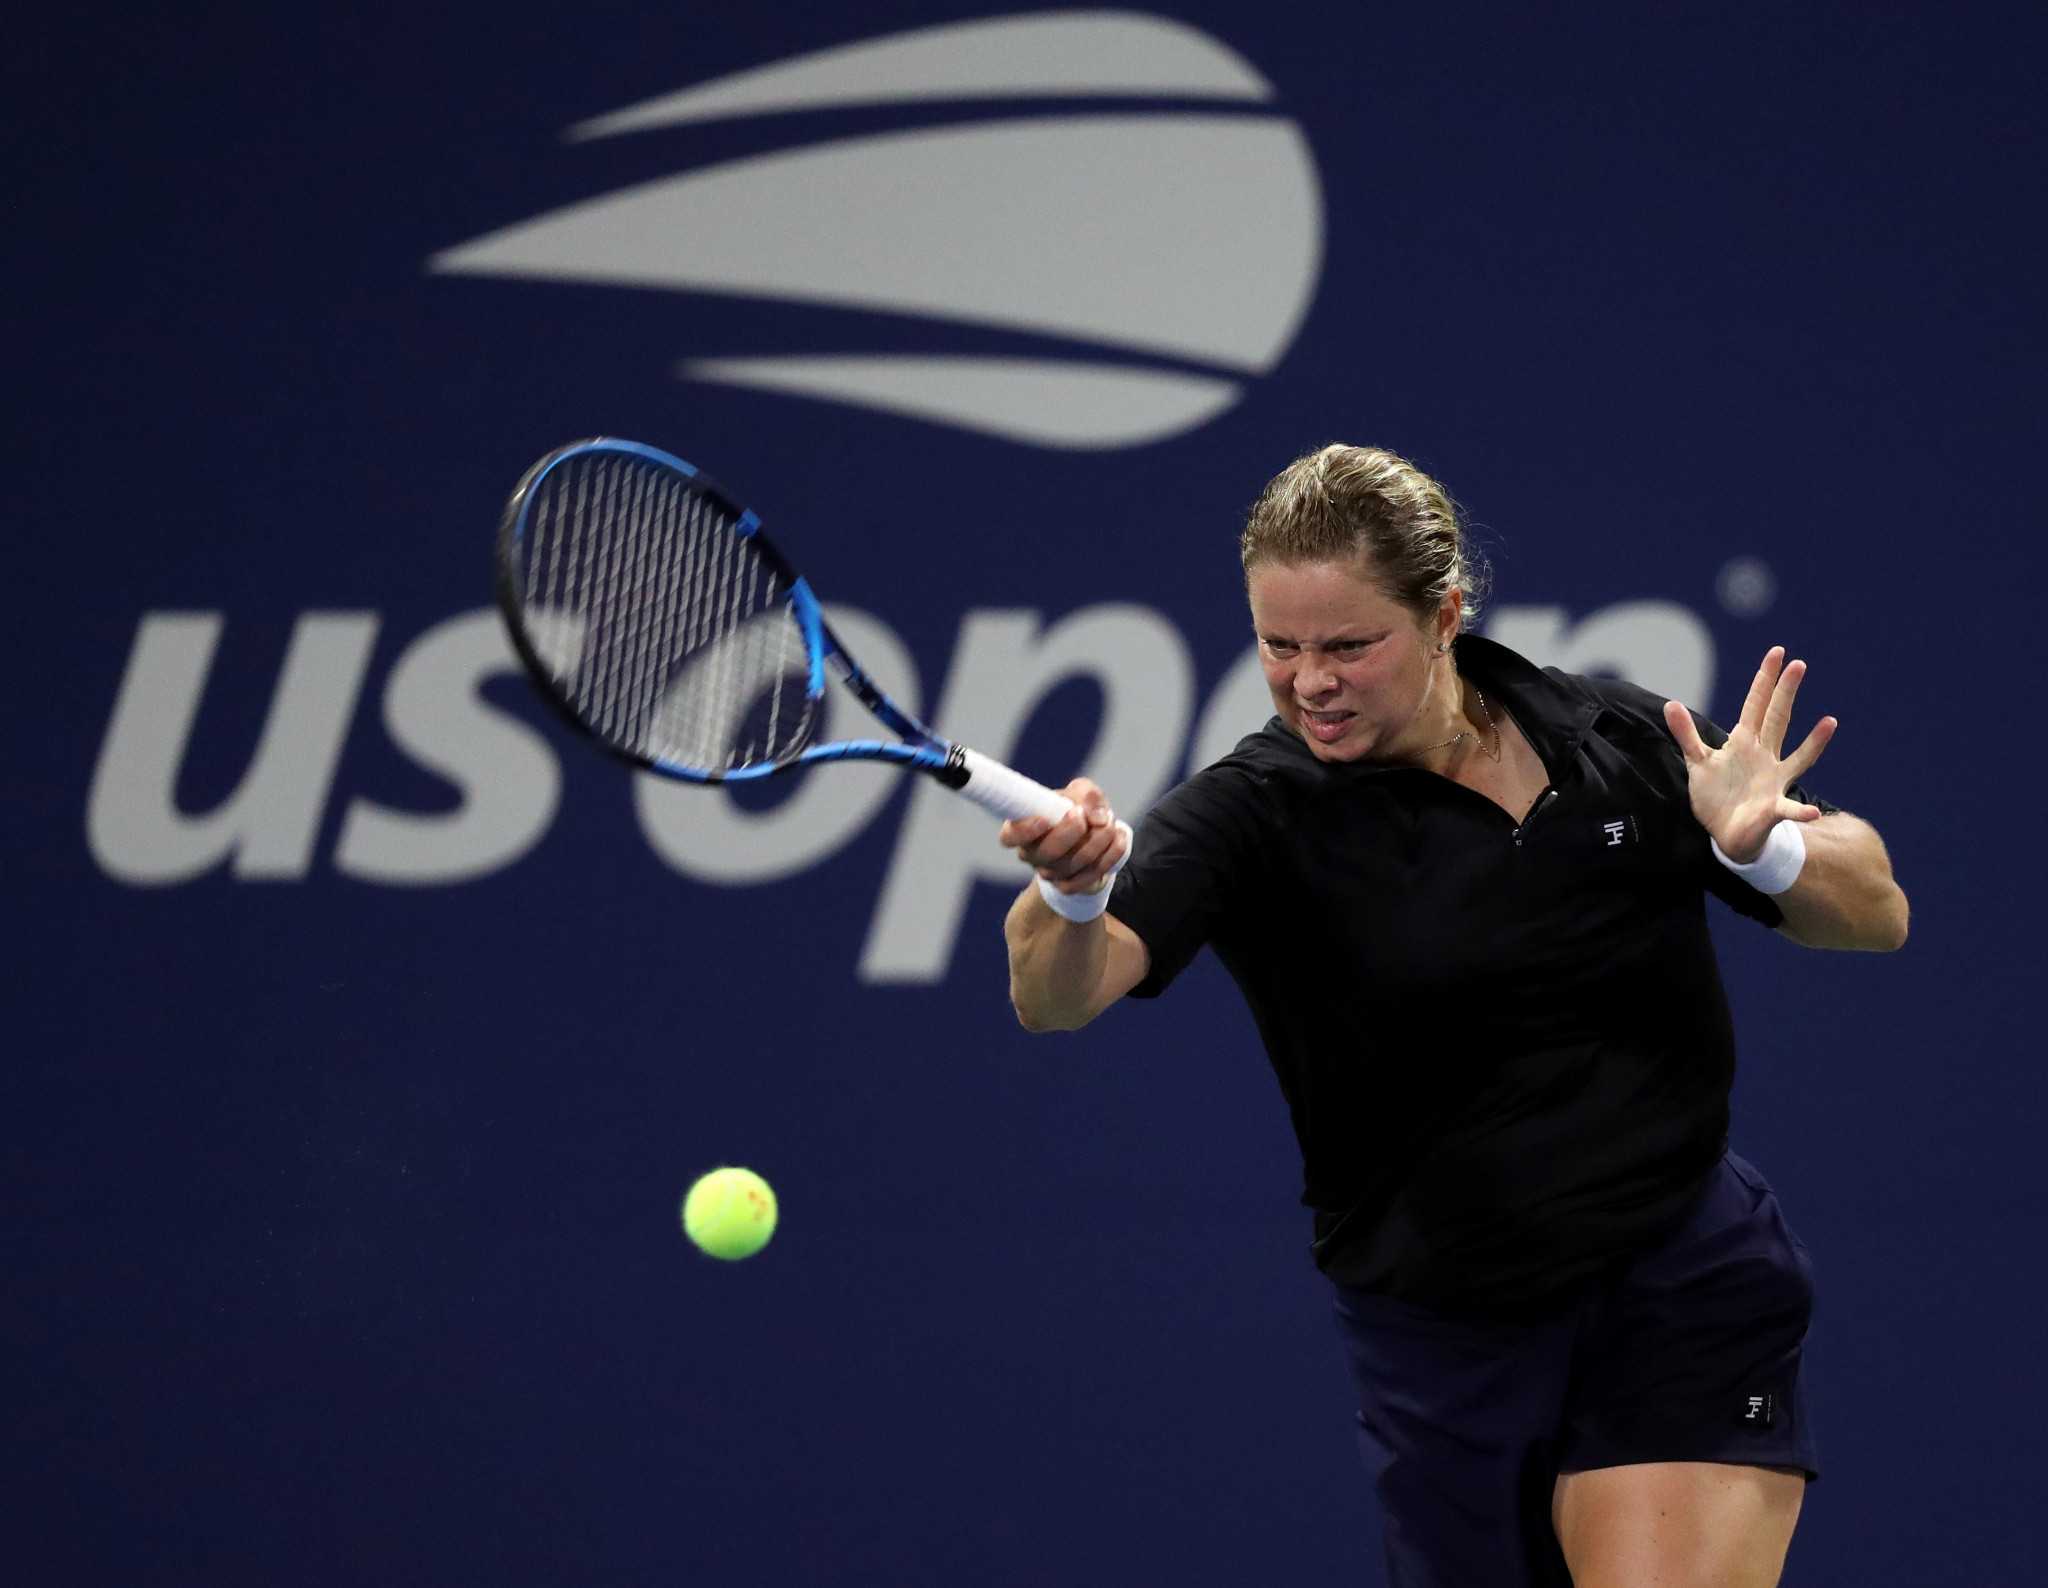 Kim Clijsters suffered defeat in her first Grand Slam match after returning from a seven year retirement ©Getty Images